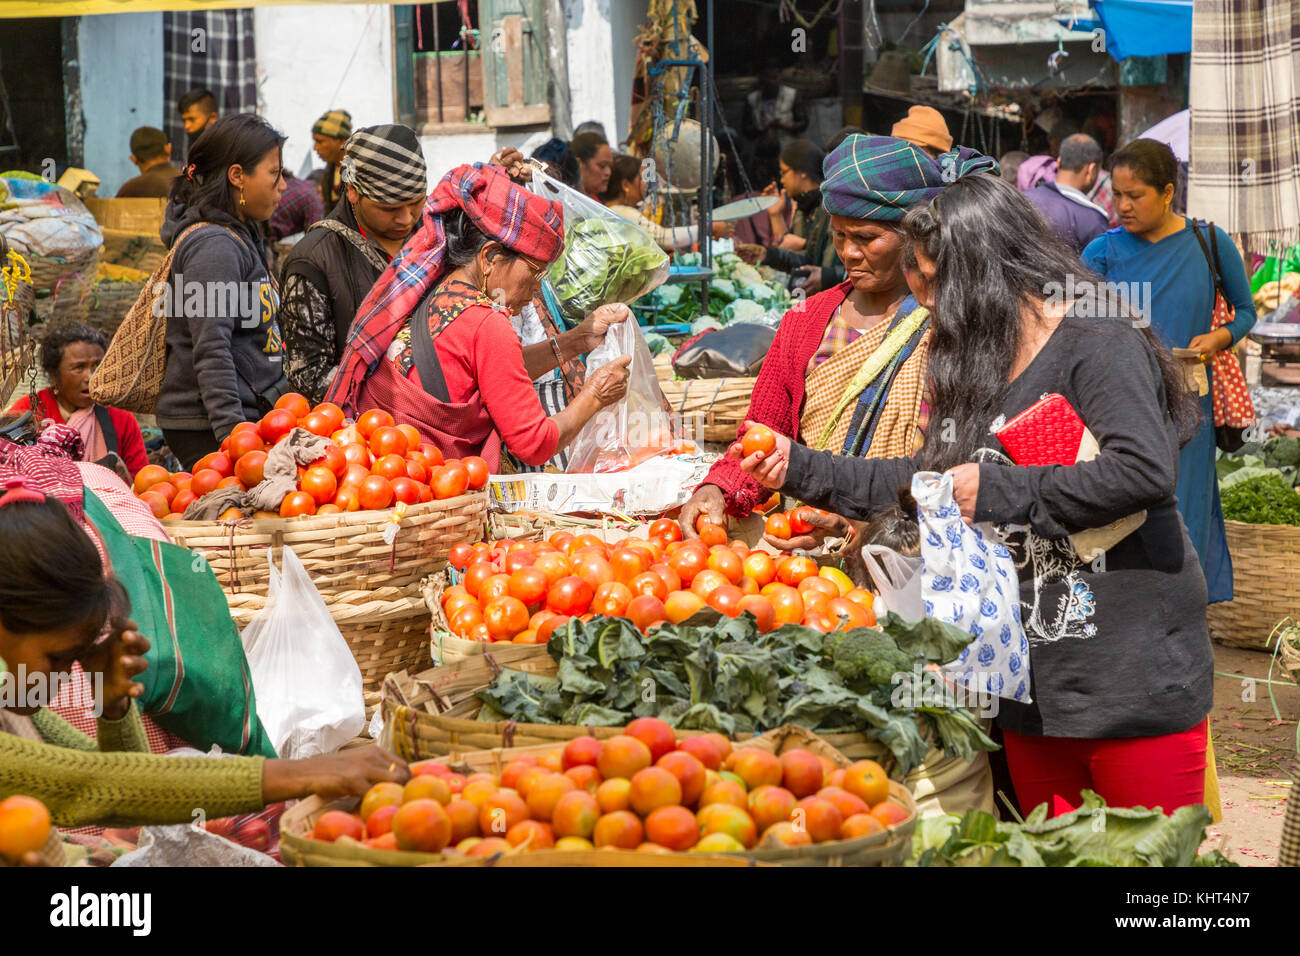 People shopping for produce in open air market, Shillong, Meghalaya, India Stock Photo